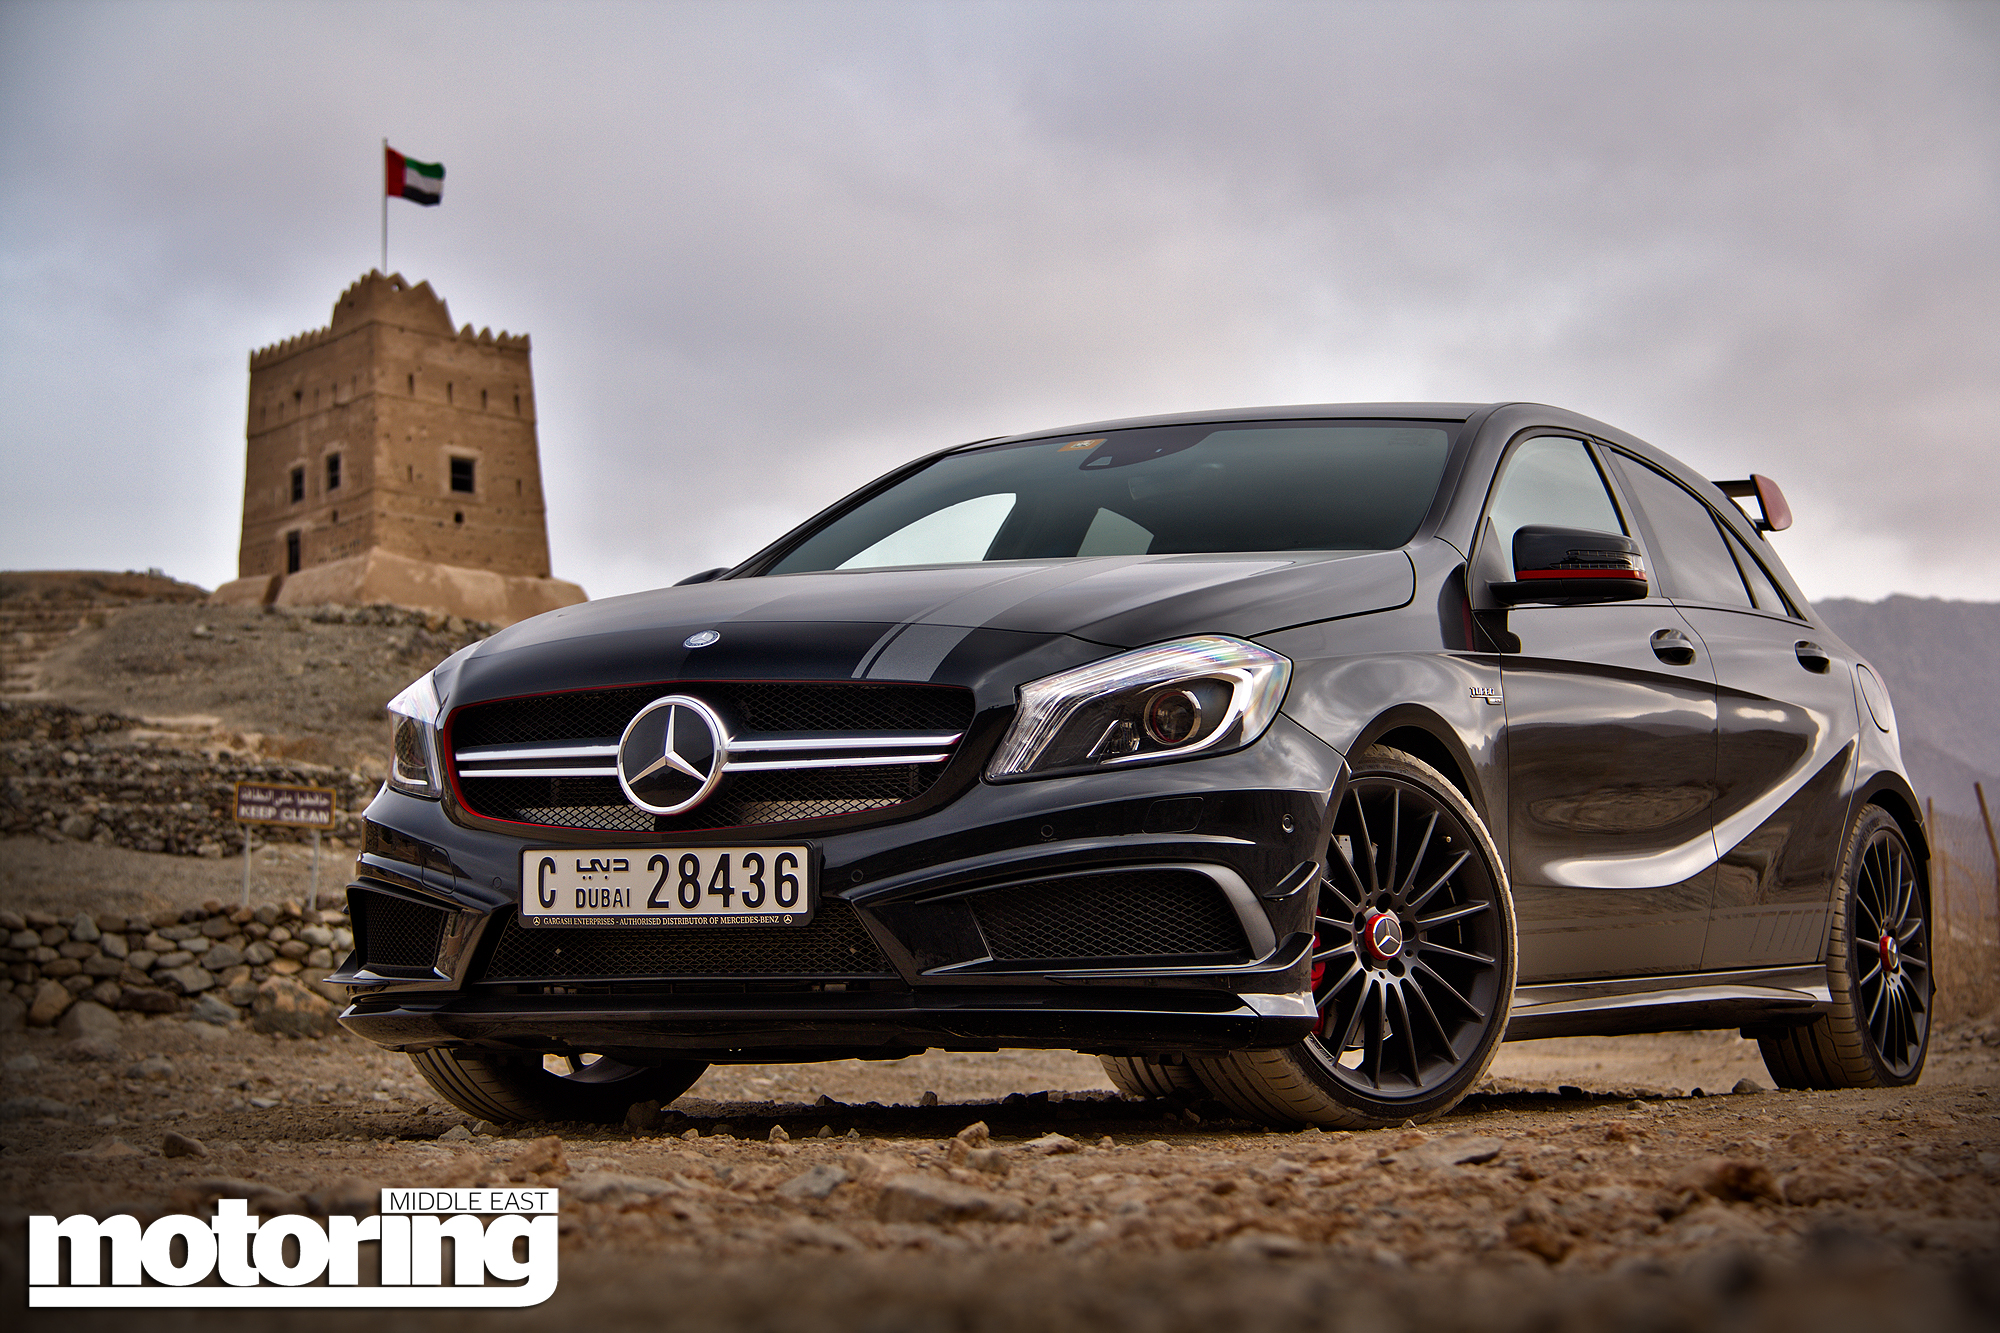 2013 Mercedes A45 Amg Reviewmotoring Middle East Car News Reviews And Buying Guides